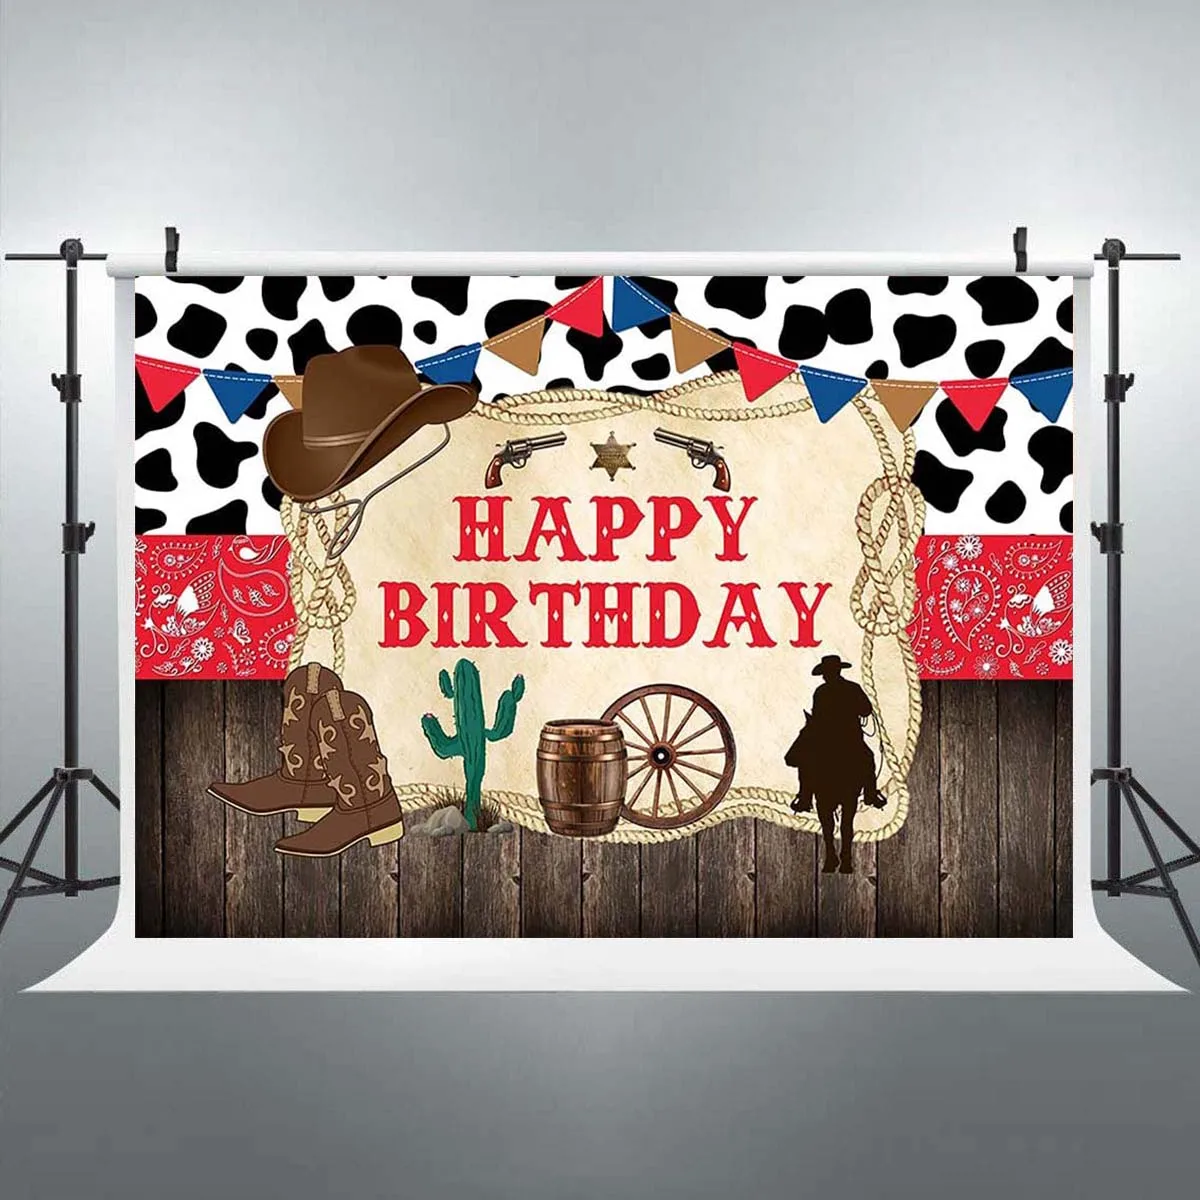 

Western Cowboy Happy Birthday Backdrop Old West Rodeo Cowboy Background Red Bandana and Rustic Wood Kids Party Decor Banner Prop